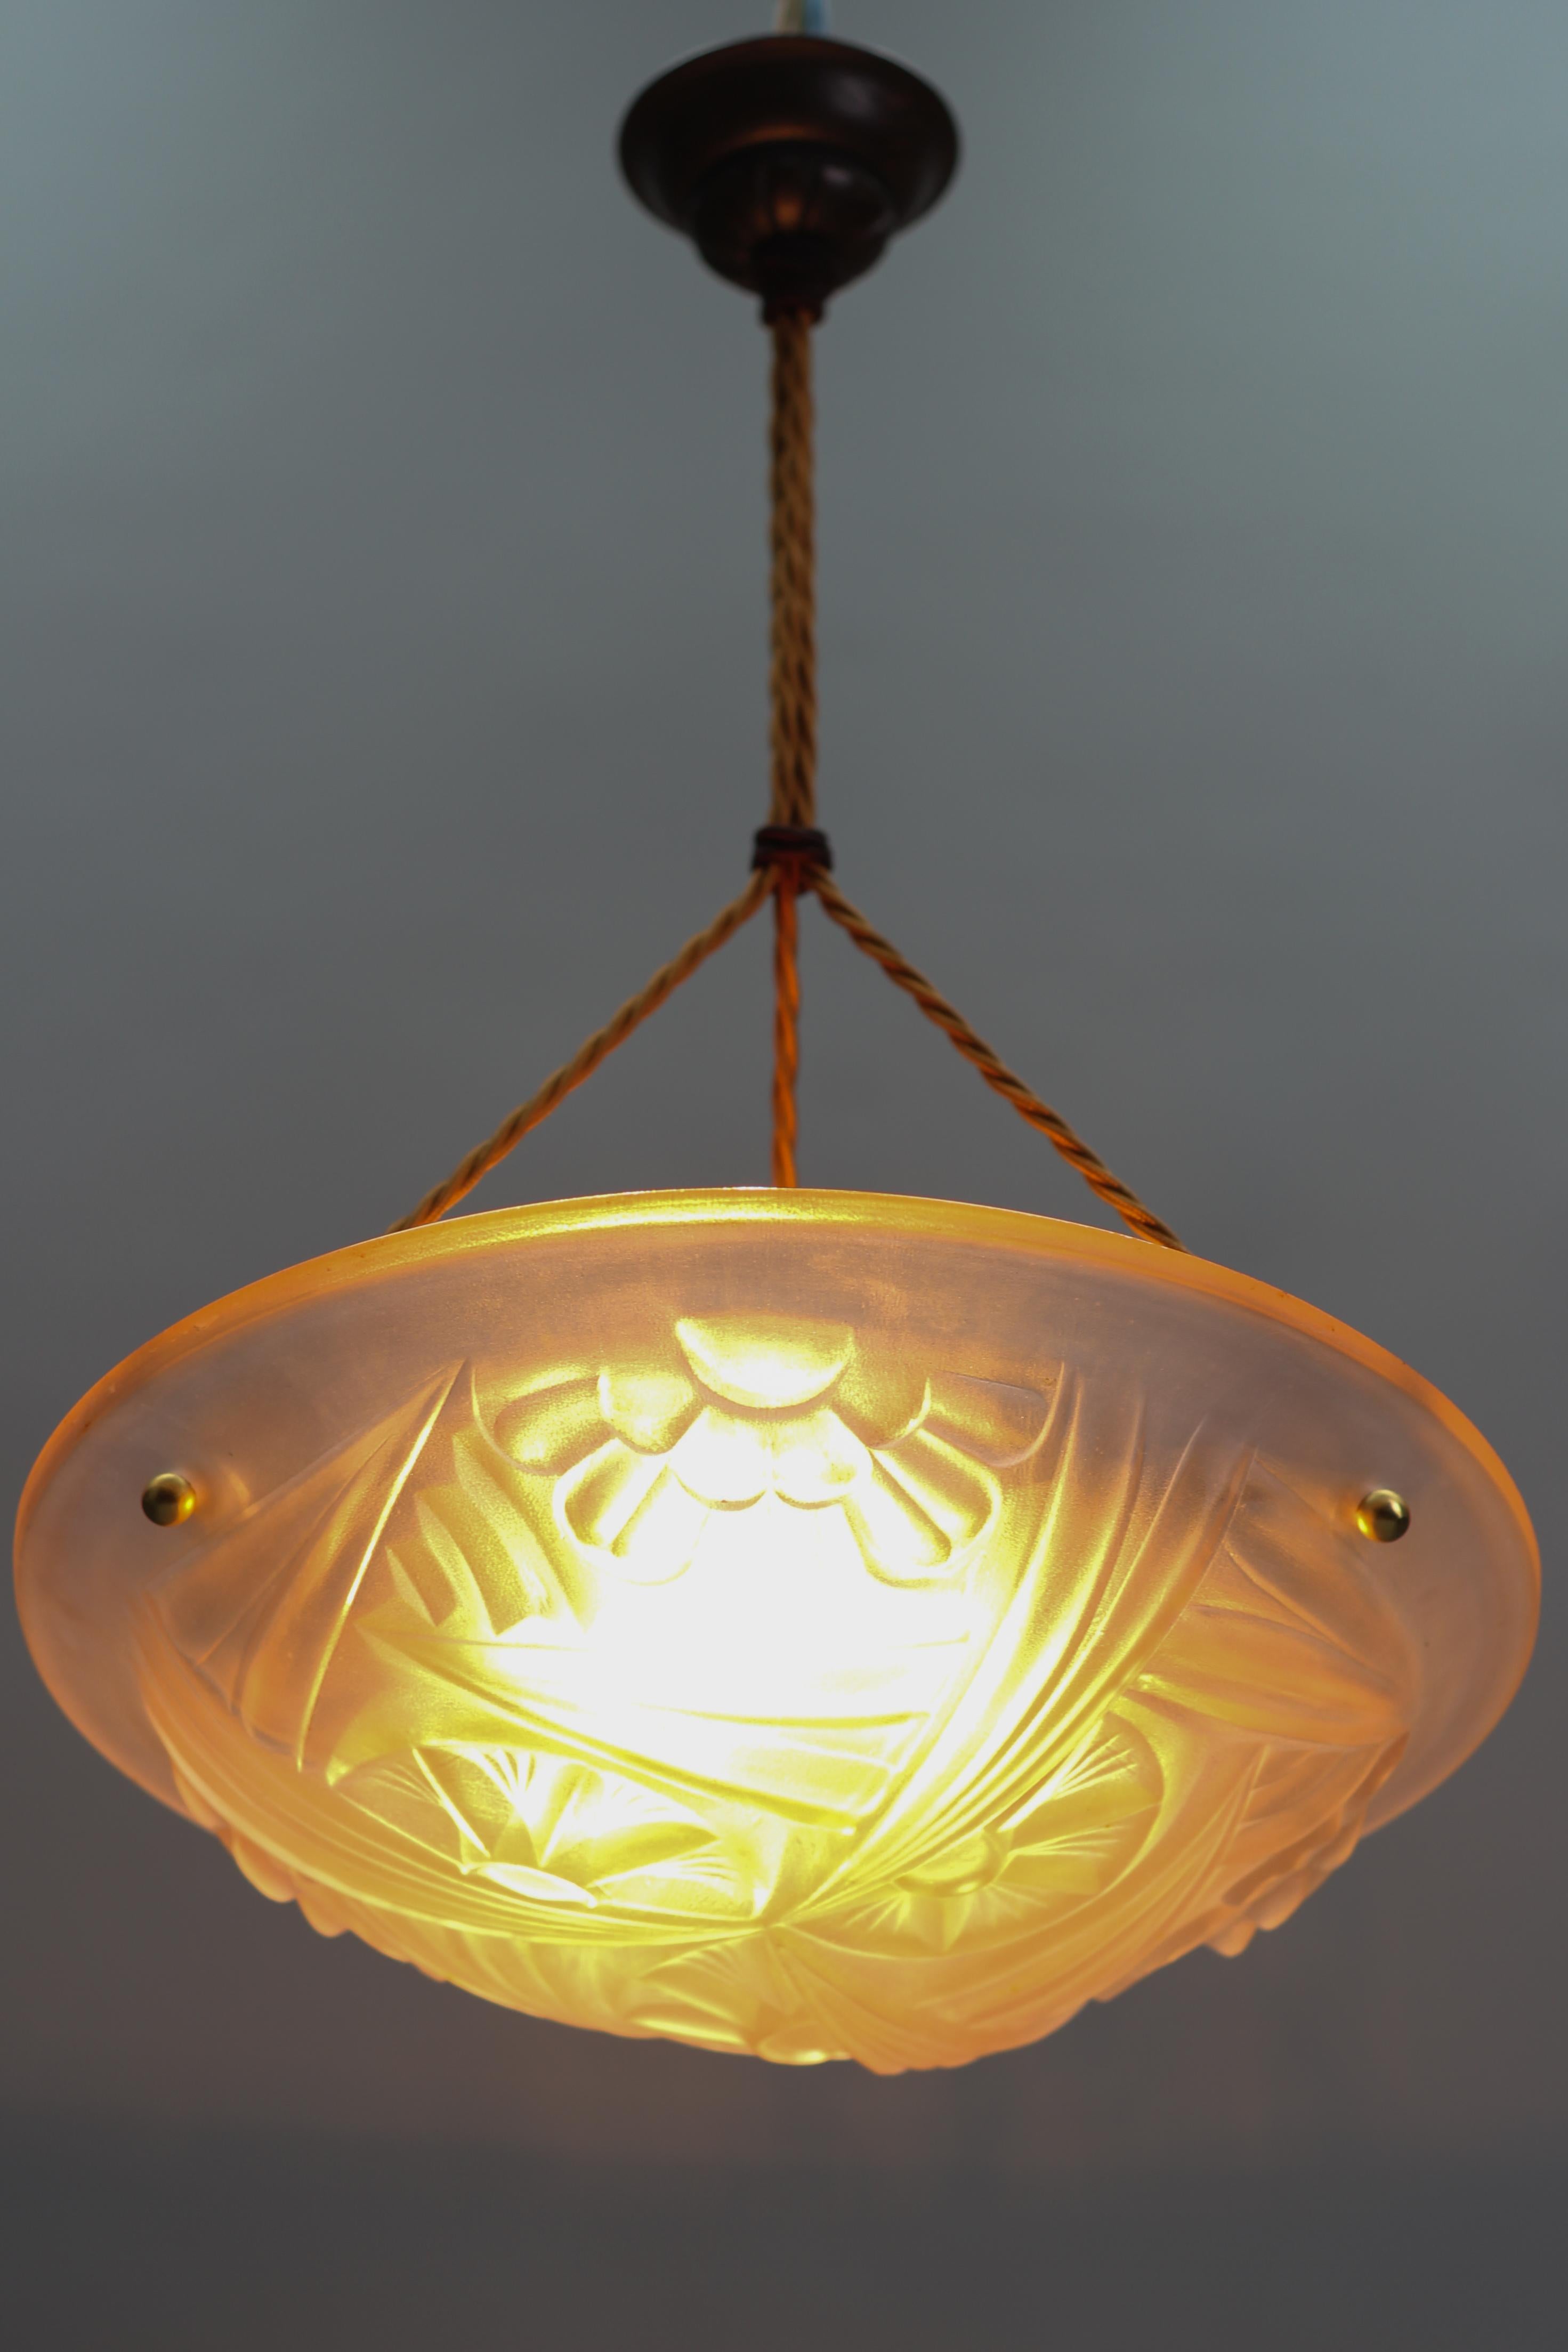 Beautiful French Art Deco three-light pendant light fixture with frosted pressed glass shade by Degué, founded by David Guéron (1892 -1950), who specialized in luxury glassware including chandeliers. 
Beautifully shaped light pink glass bowl